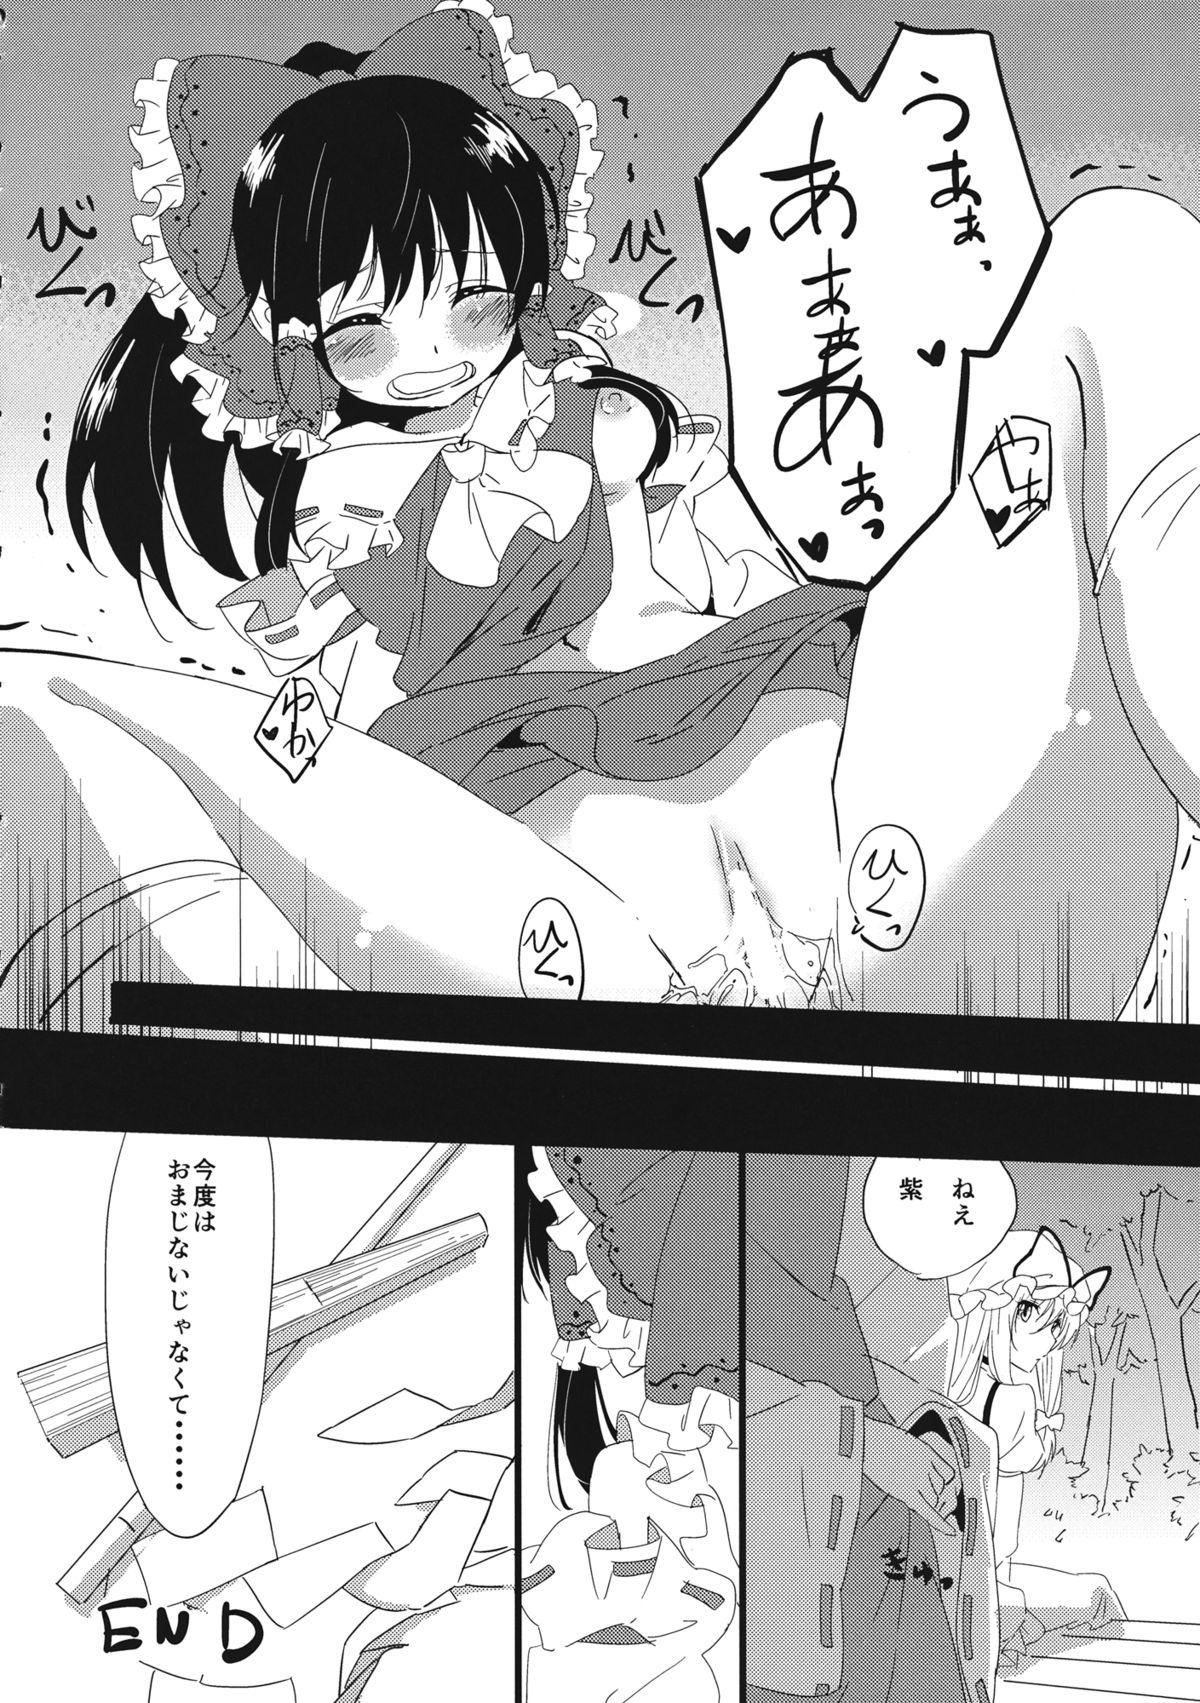 Pussysex Touhou Muchi Shichu Goudou - Toho joint magazine sex in the ignorant situations - Touhou project White Girl - Page 8